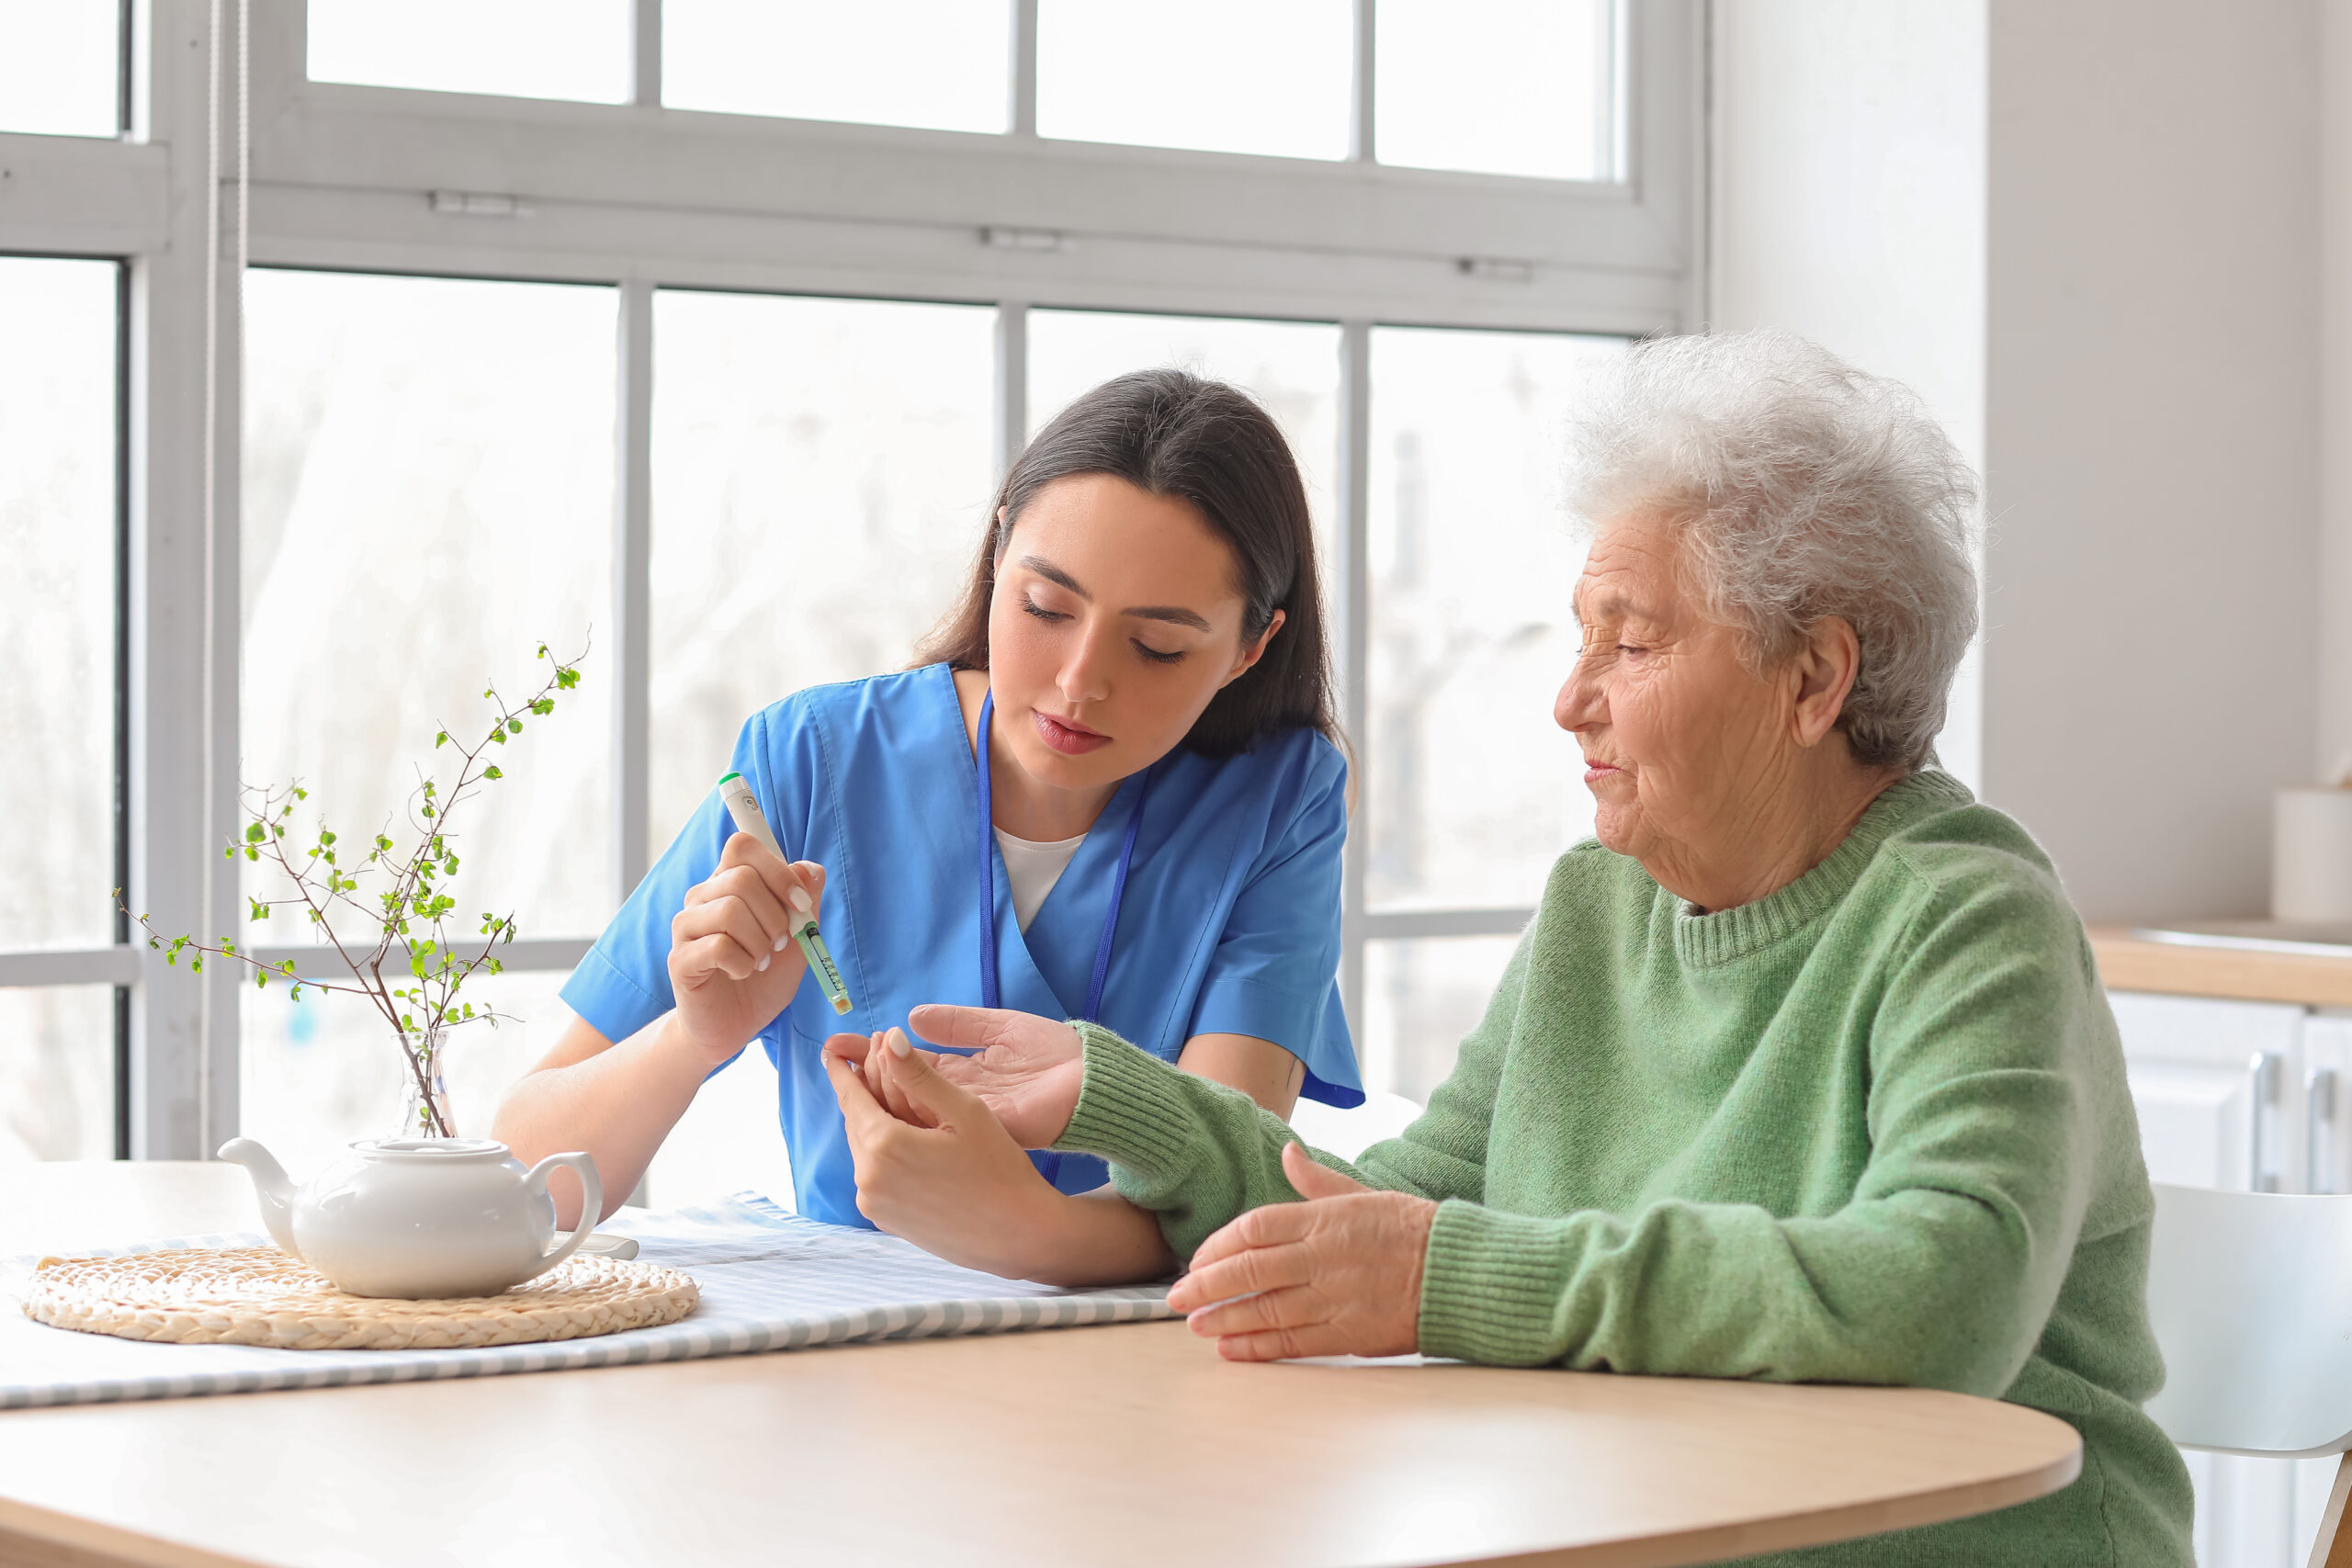 Respite Care services for caregivers help manage various tasks for seniors